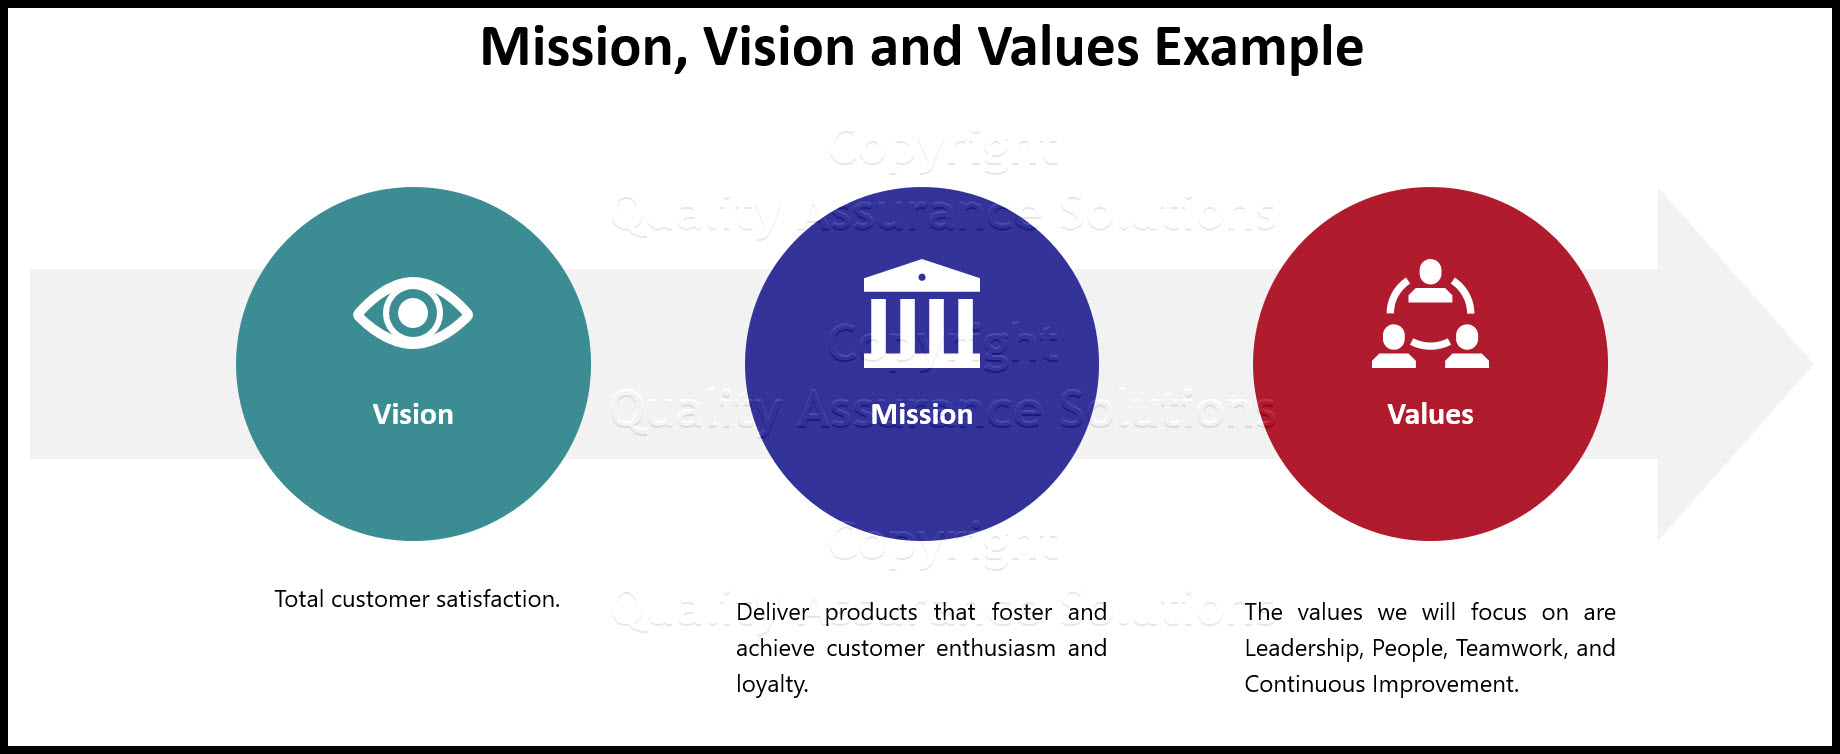 Review this sample business model for a small to medium size business. It covers vision, mission, values, objectives, and strategies.